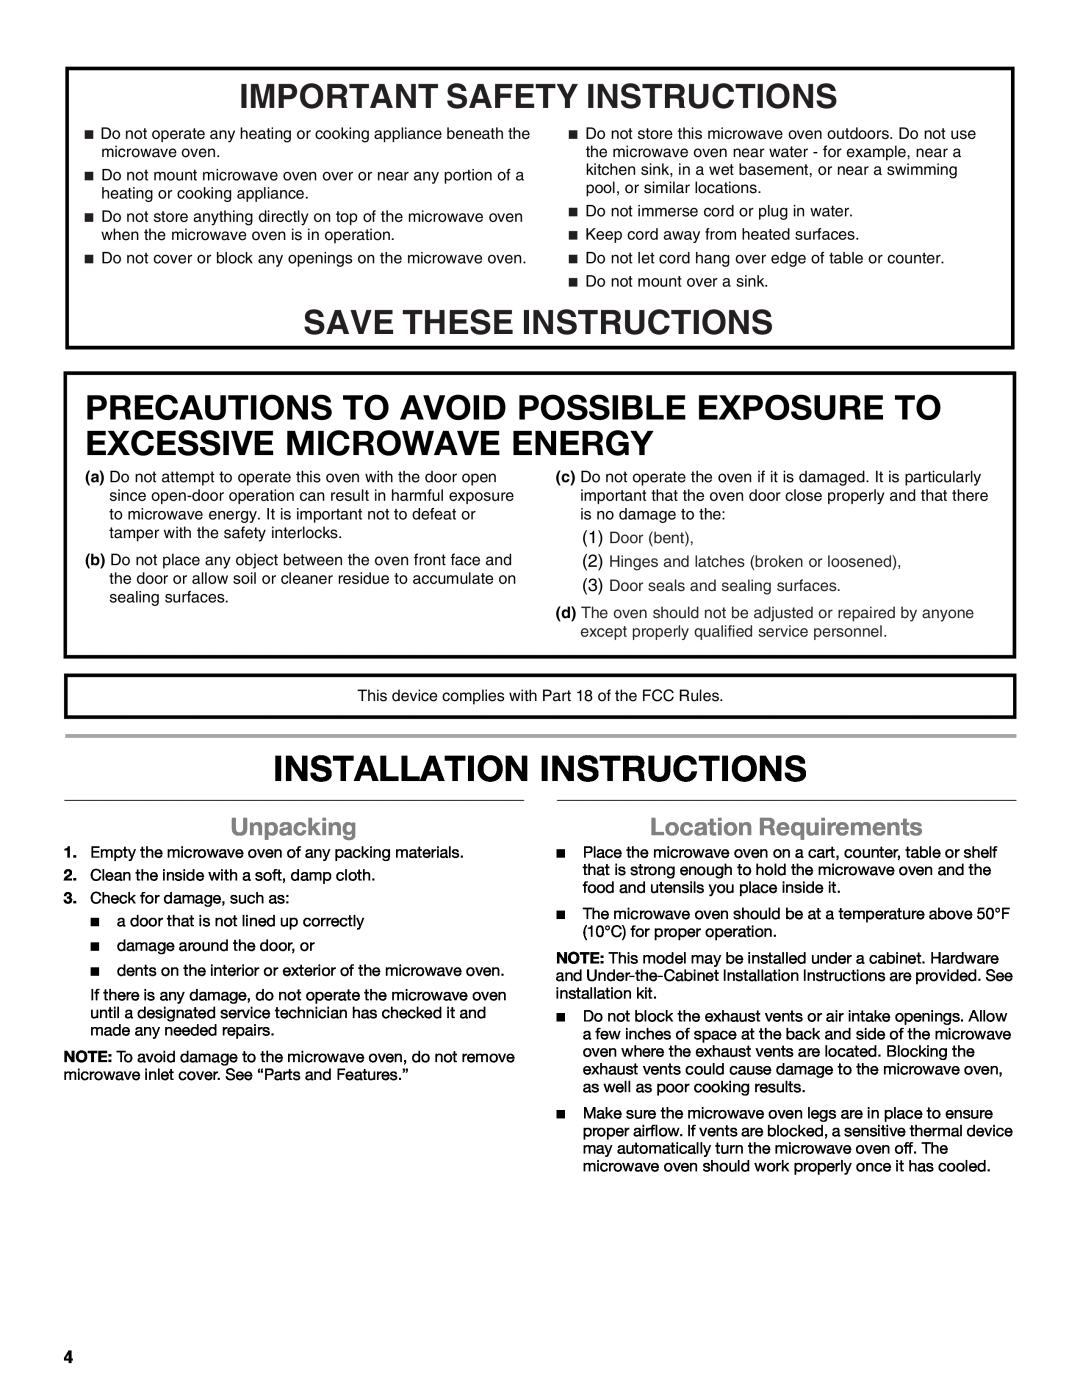 Whirlpool WMC10007 manual Installation Instructions, Precautions To Avoid Possible Exposure To Excessive Microwave Energy 